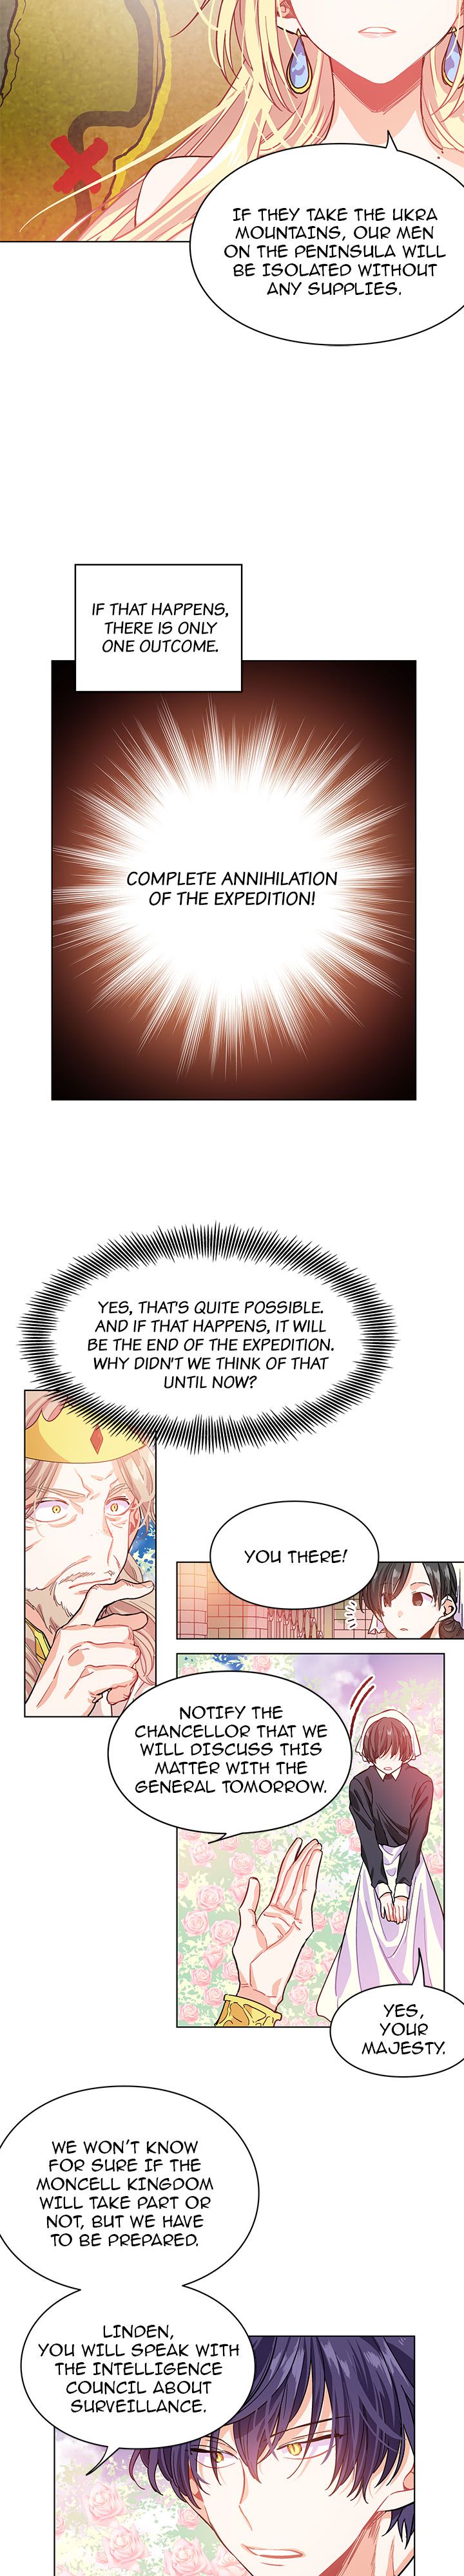 Doctor Elise - The Royal Lady with the Lamp - Chapter 8 Page 4